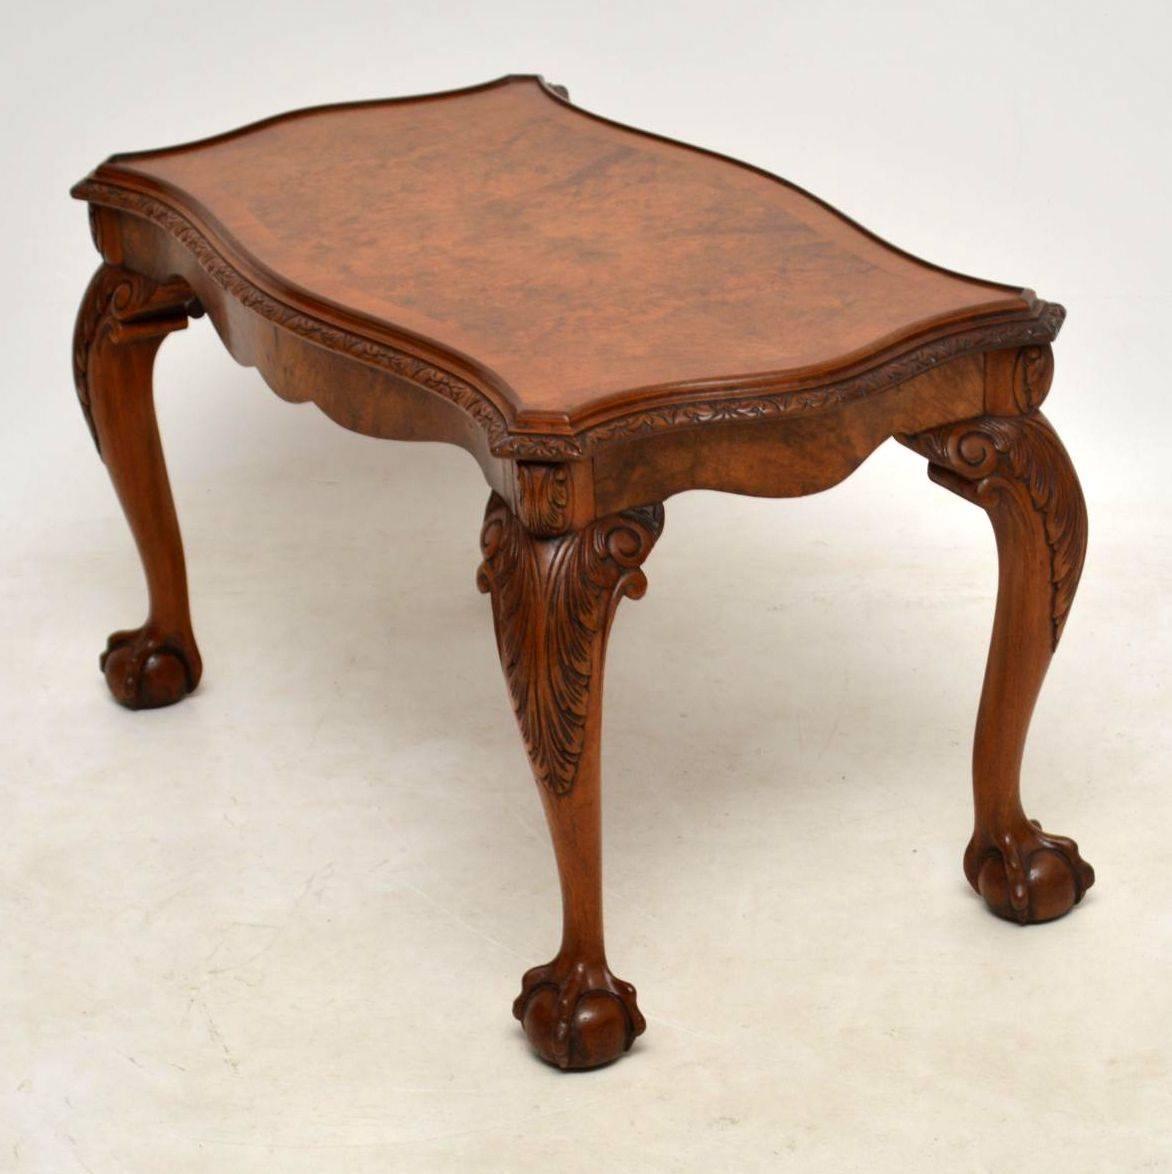 Top quality antique walnut coffee table in excellent condition, dating from the 1920’s period. The shaped top has beautifully patterned burr walnut veneers & so does the sides. The top is also cross banded & has a ridge around it. The top edges are